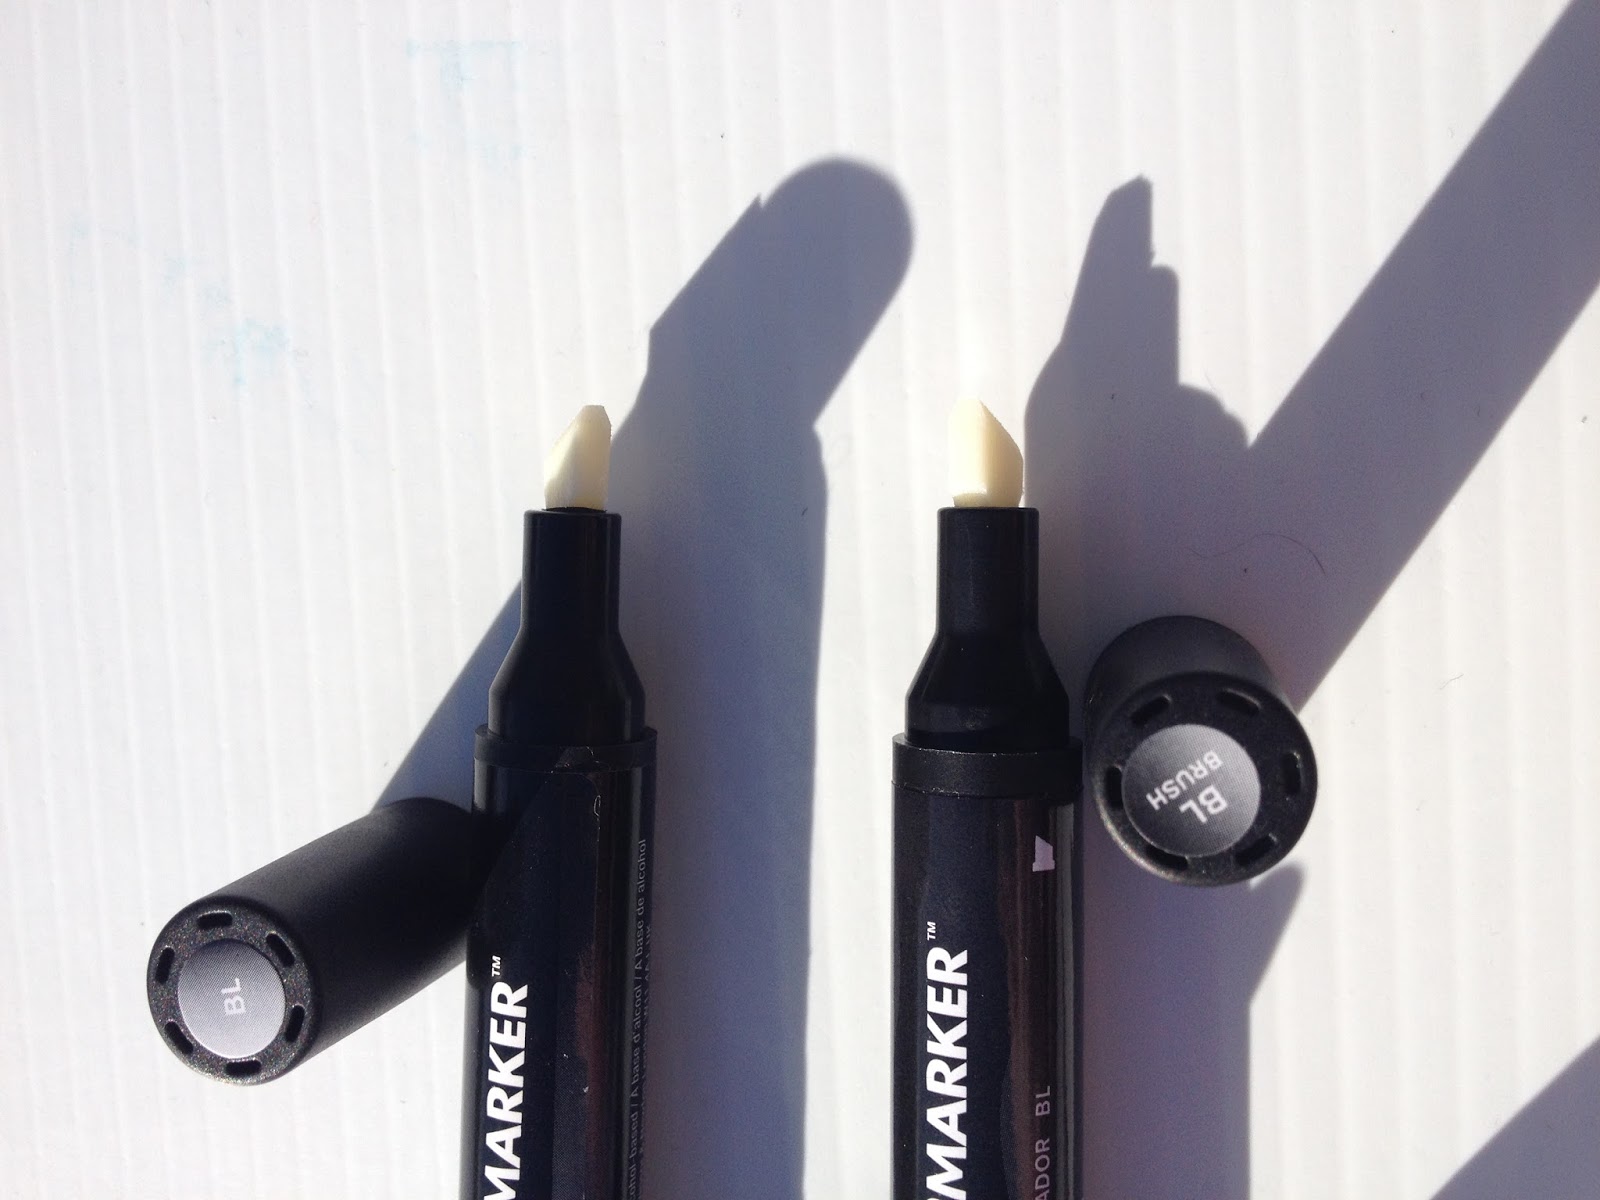 Alcohol Marker Review: Winsor and Newton Promarker and Brush Marker